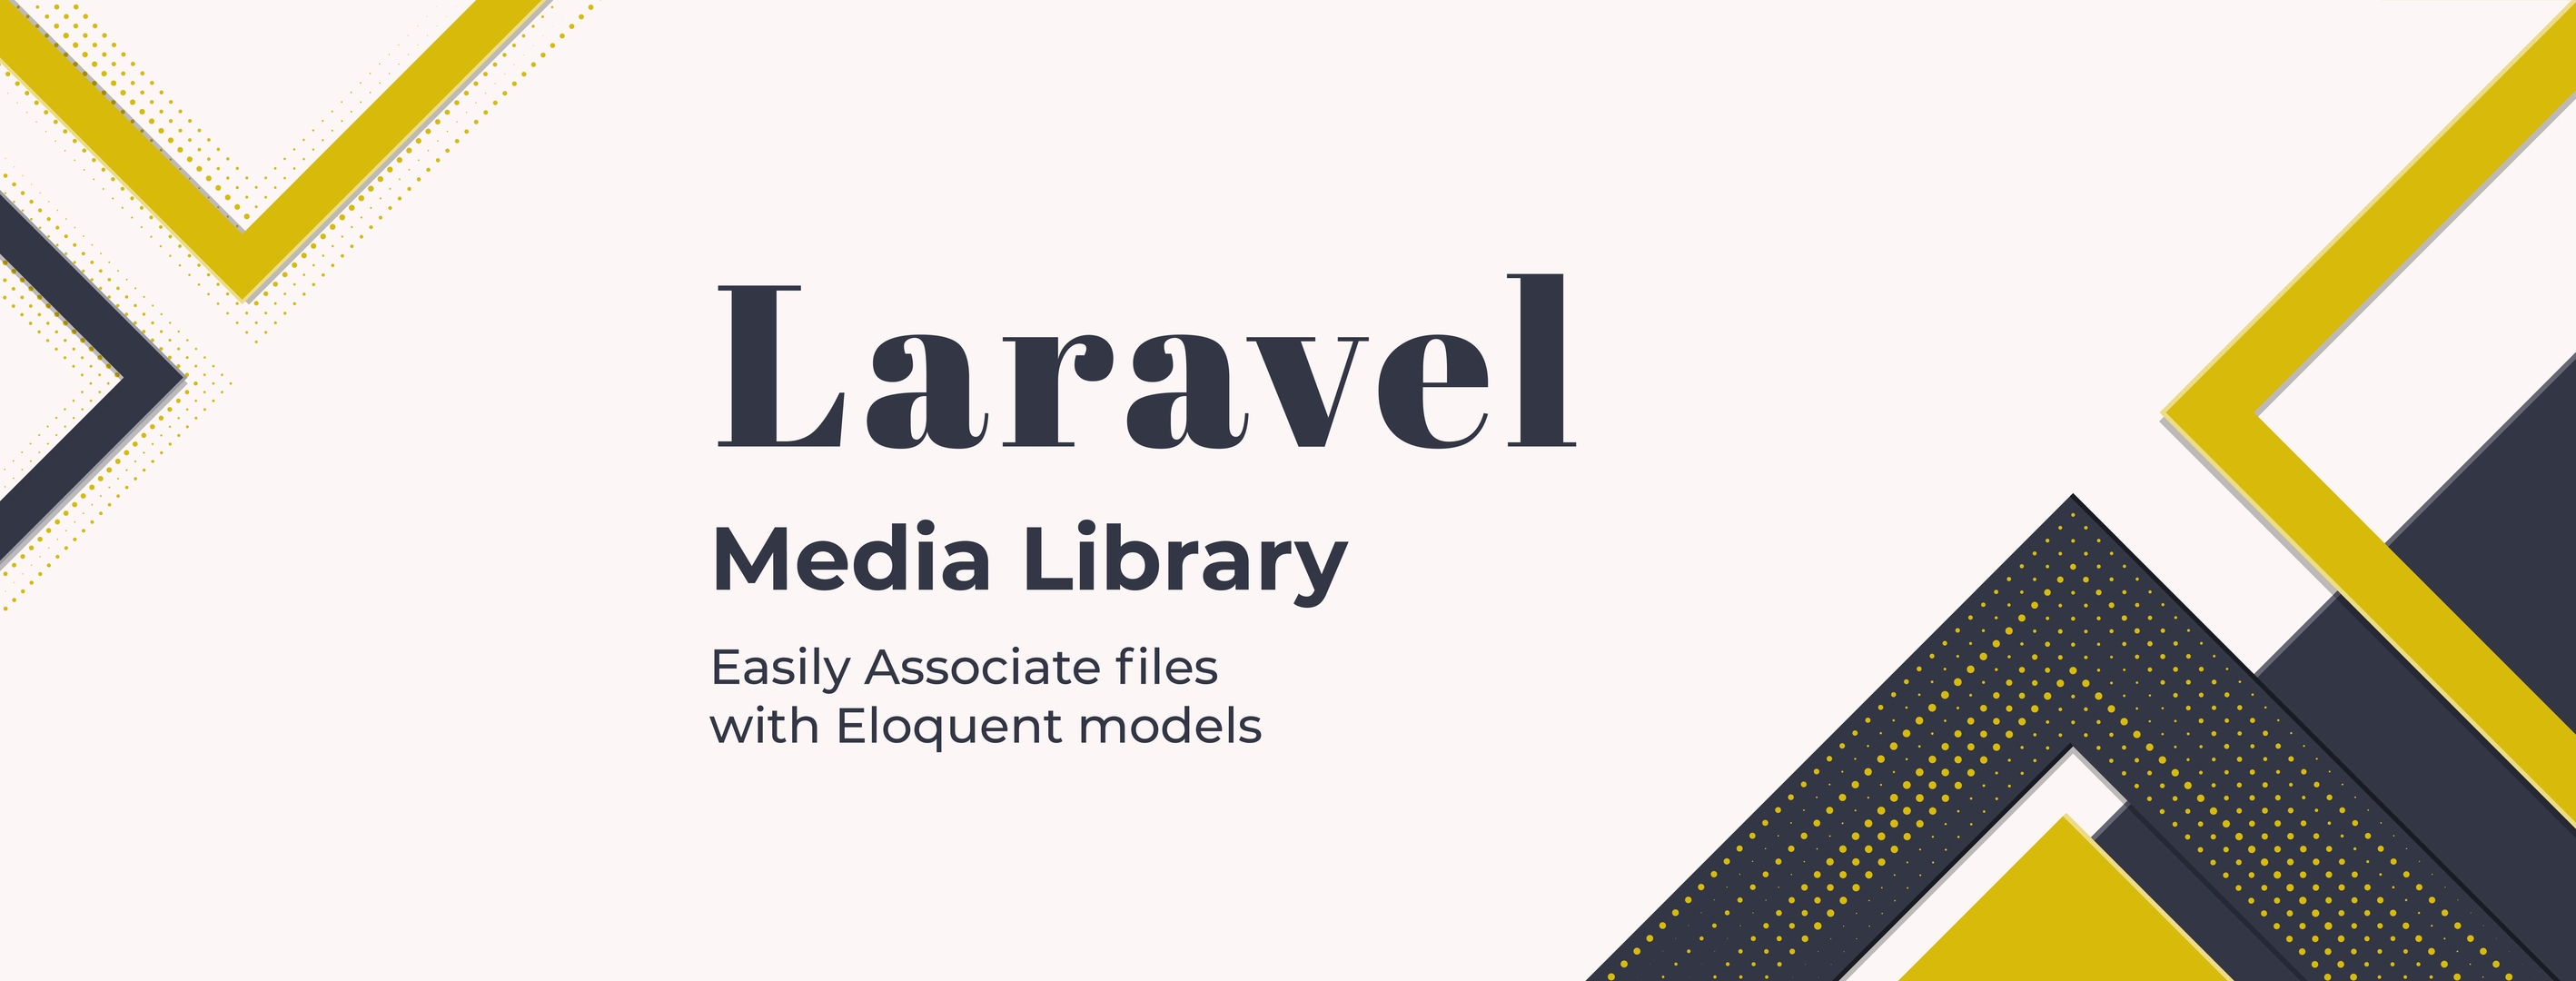 Laravel-Medialibrary - Associate files with Eloquent models cover image